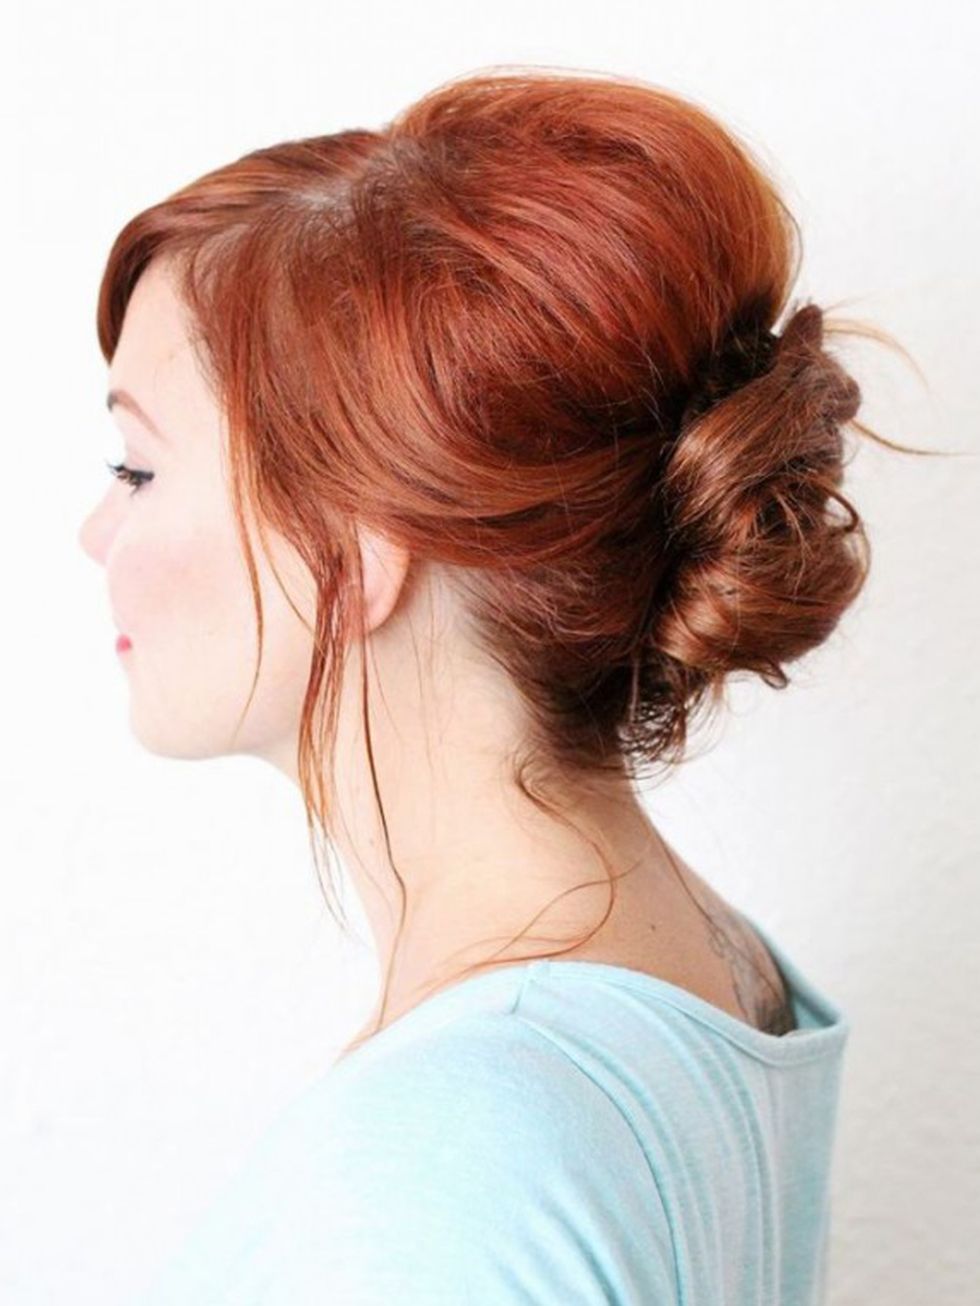 Hair, Hairstyle, Chin, Shoulder, Style, Red hair, Beauty, Neck, Brown hair, Hair coloring, 